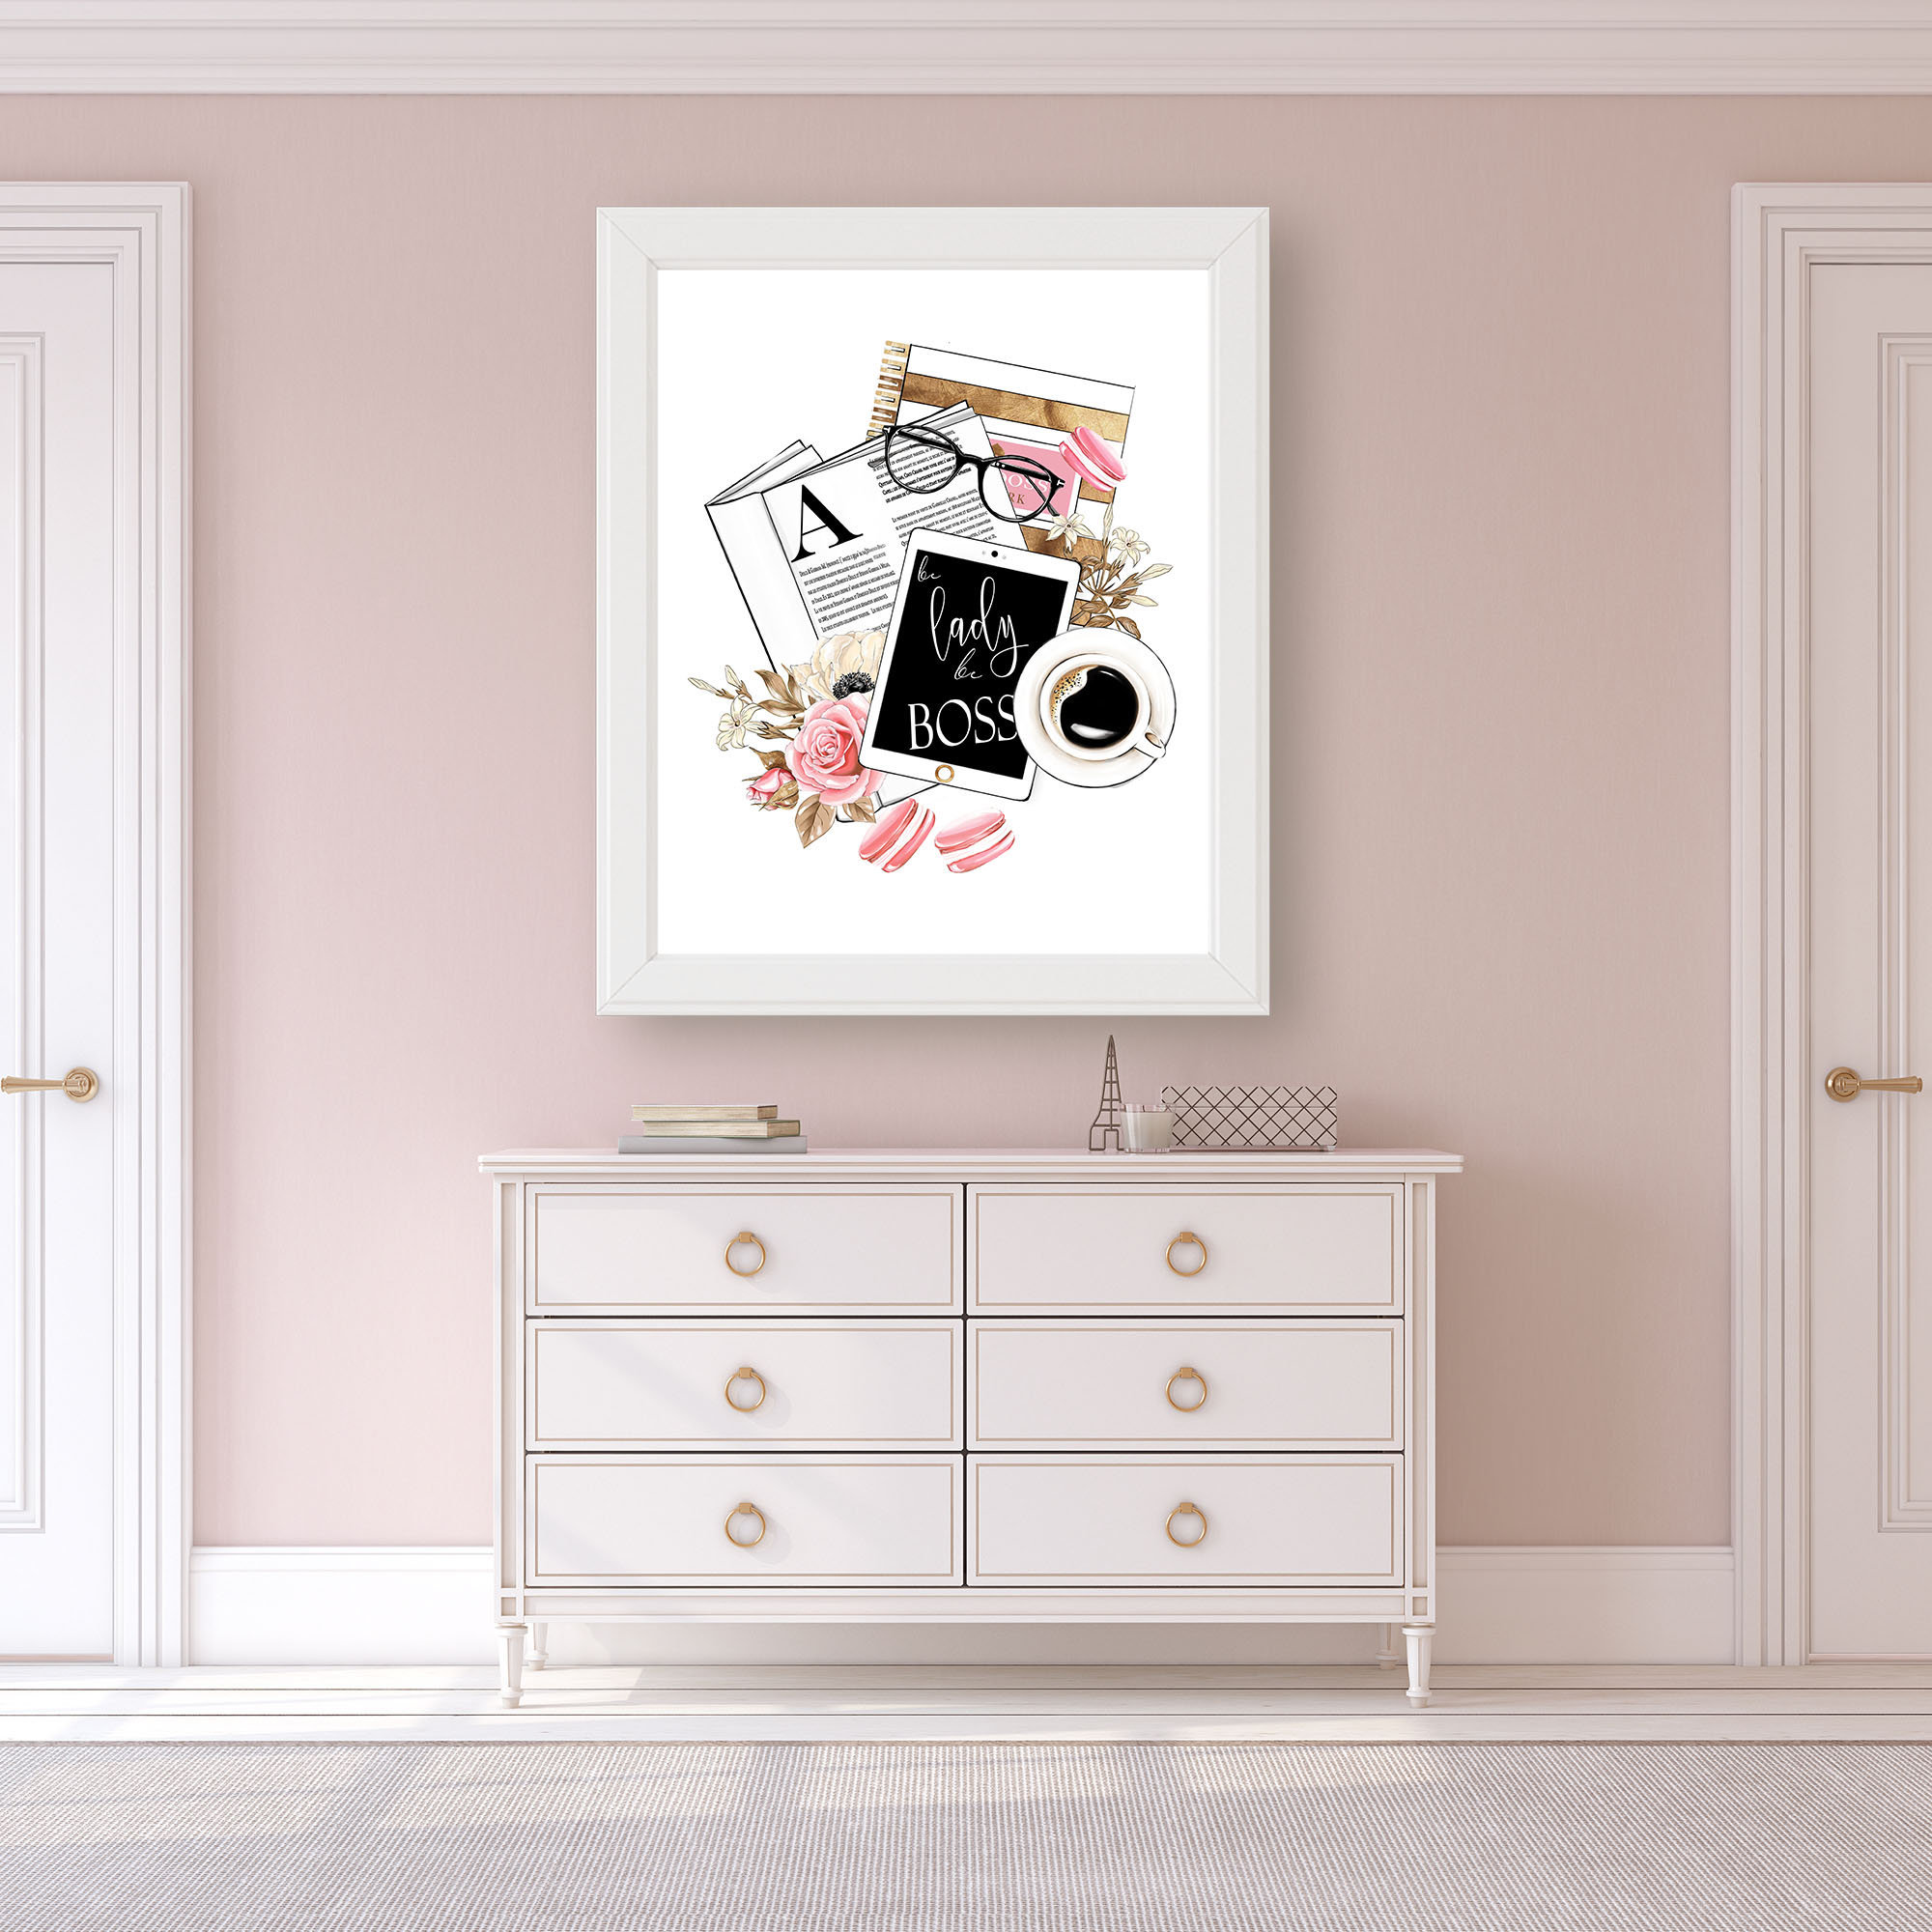 Boss Lady Wall Art Lady Boss Wall Art Boss Lady Poster Girly Art Prints  Girly Office Decor Glamour Wall Art Glamour Prints - Etsy